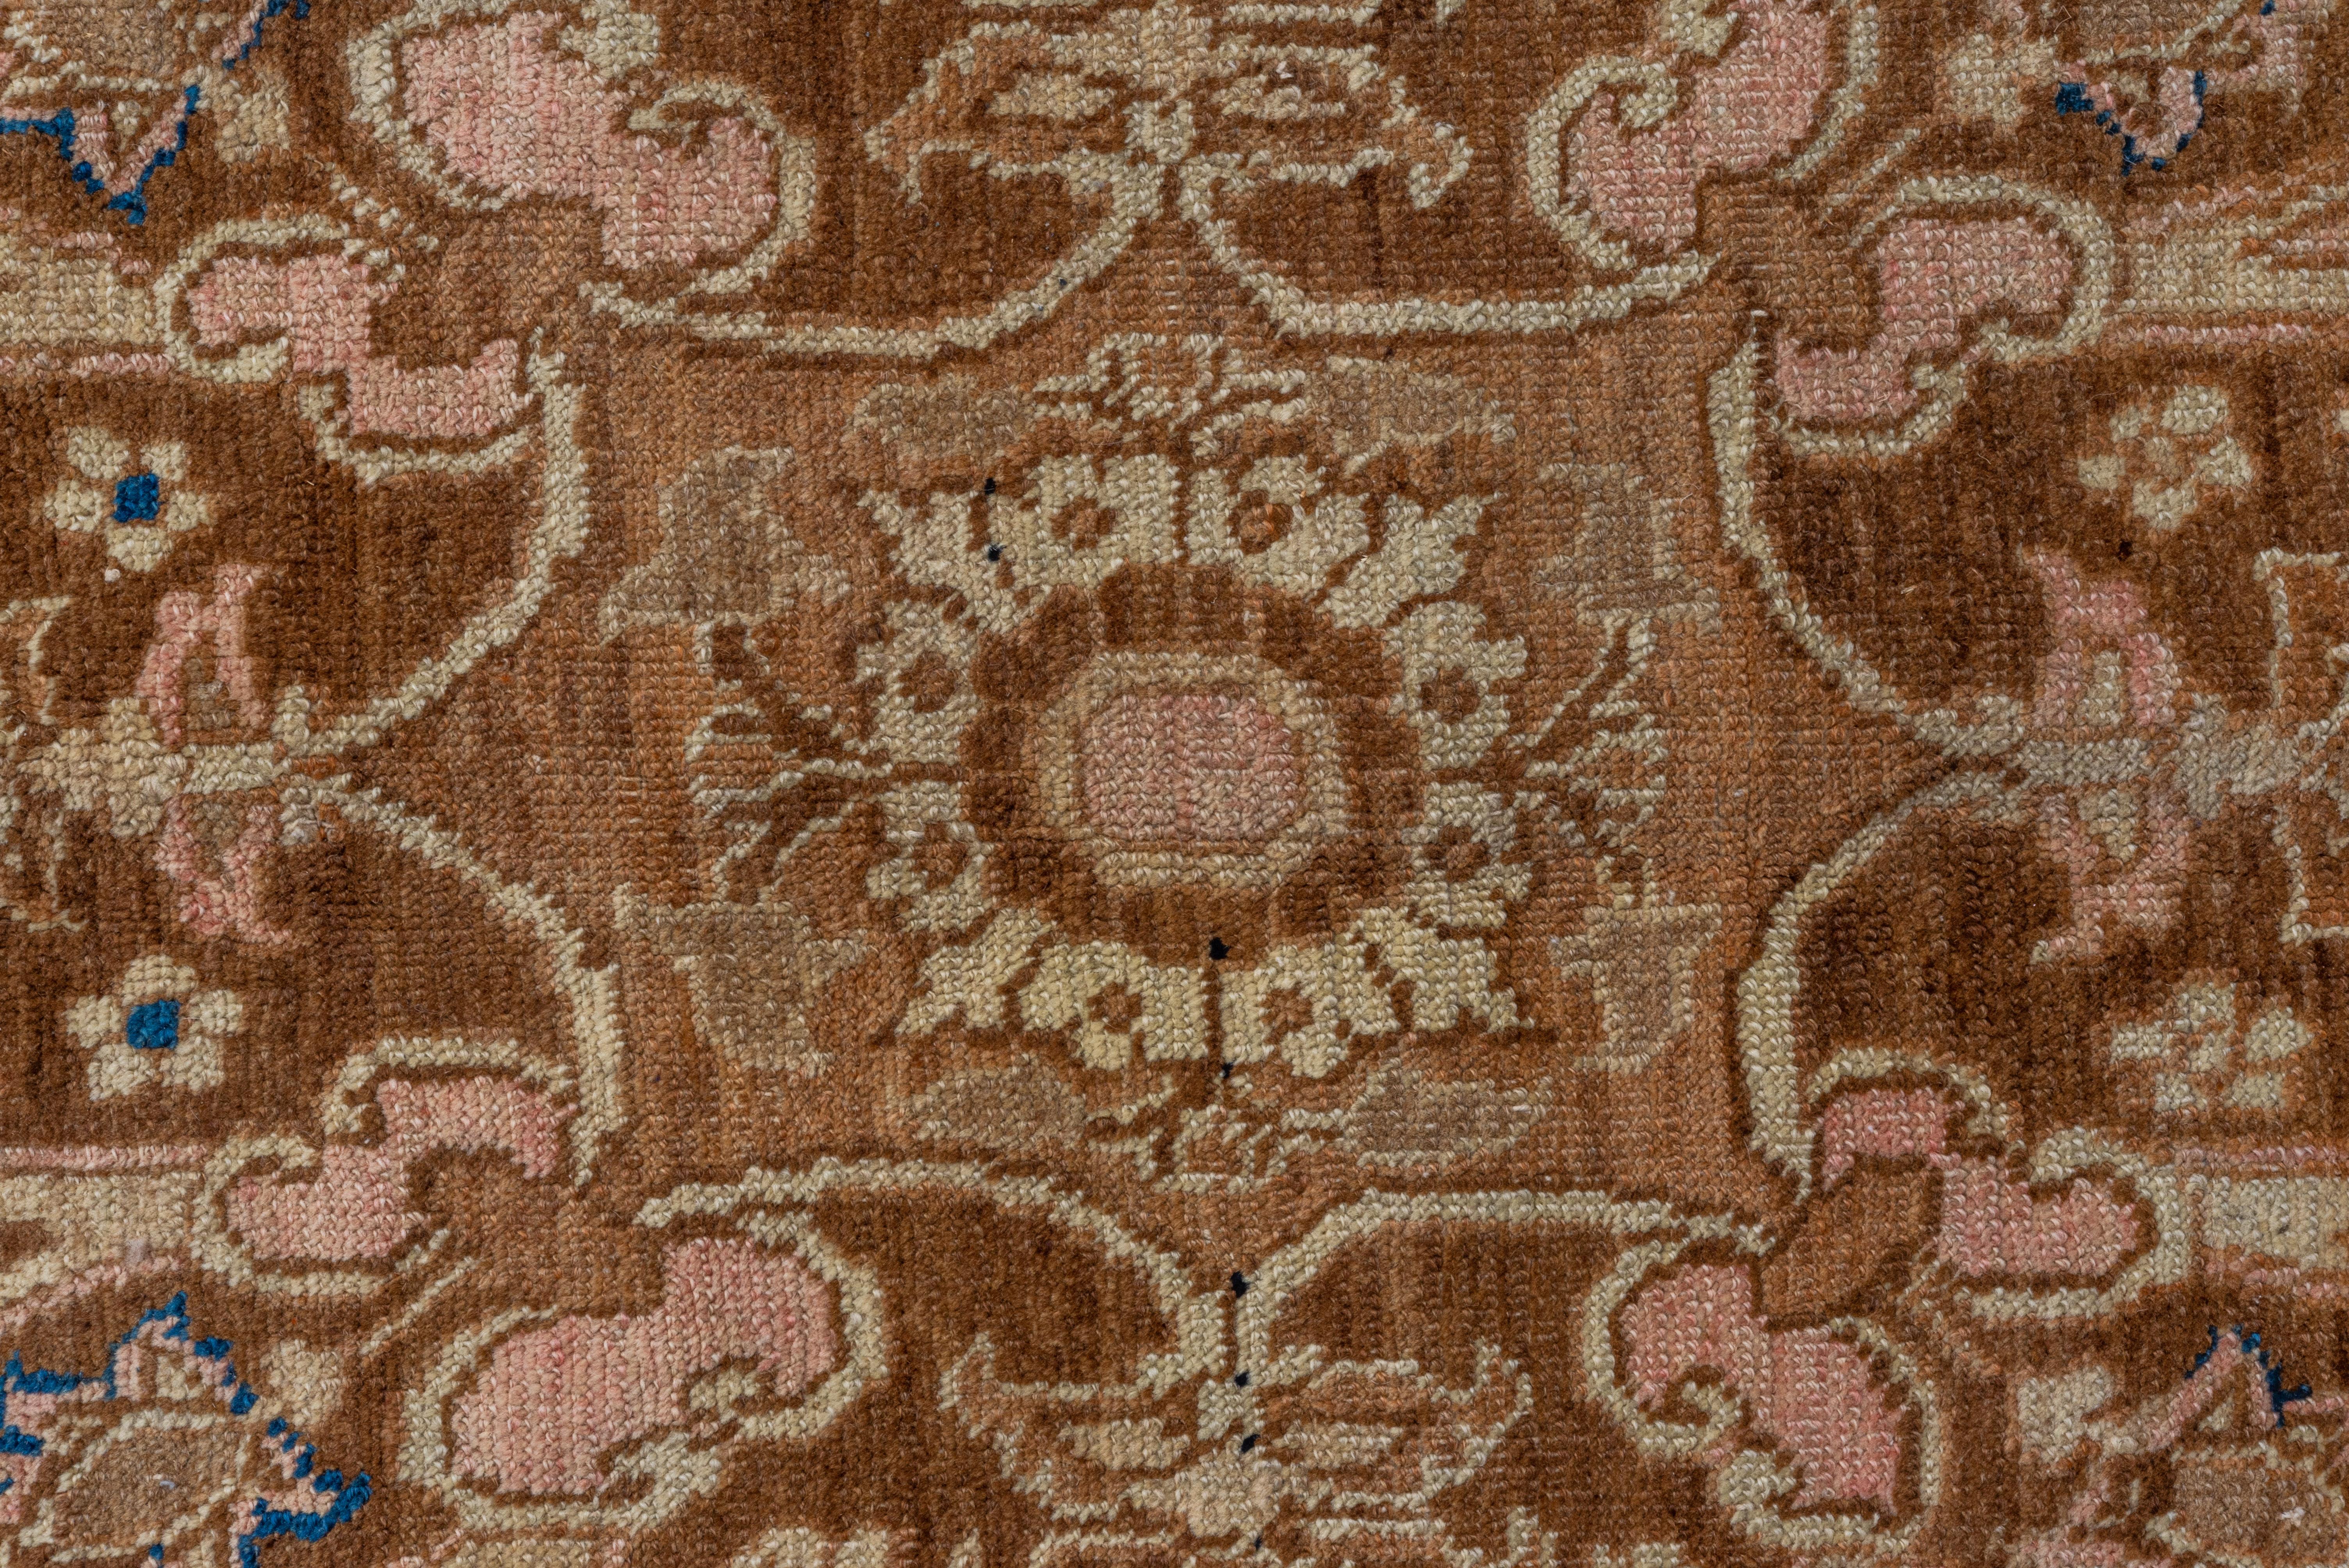 Early 20th Century Antique Persian Heriz Serapi Rug, Tan Field with Blue & Pink Accents, Circa 1910 For Sale